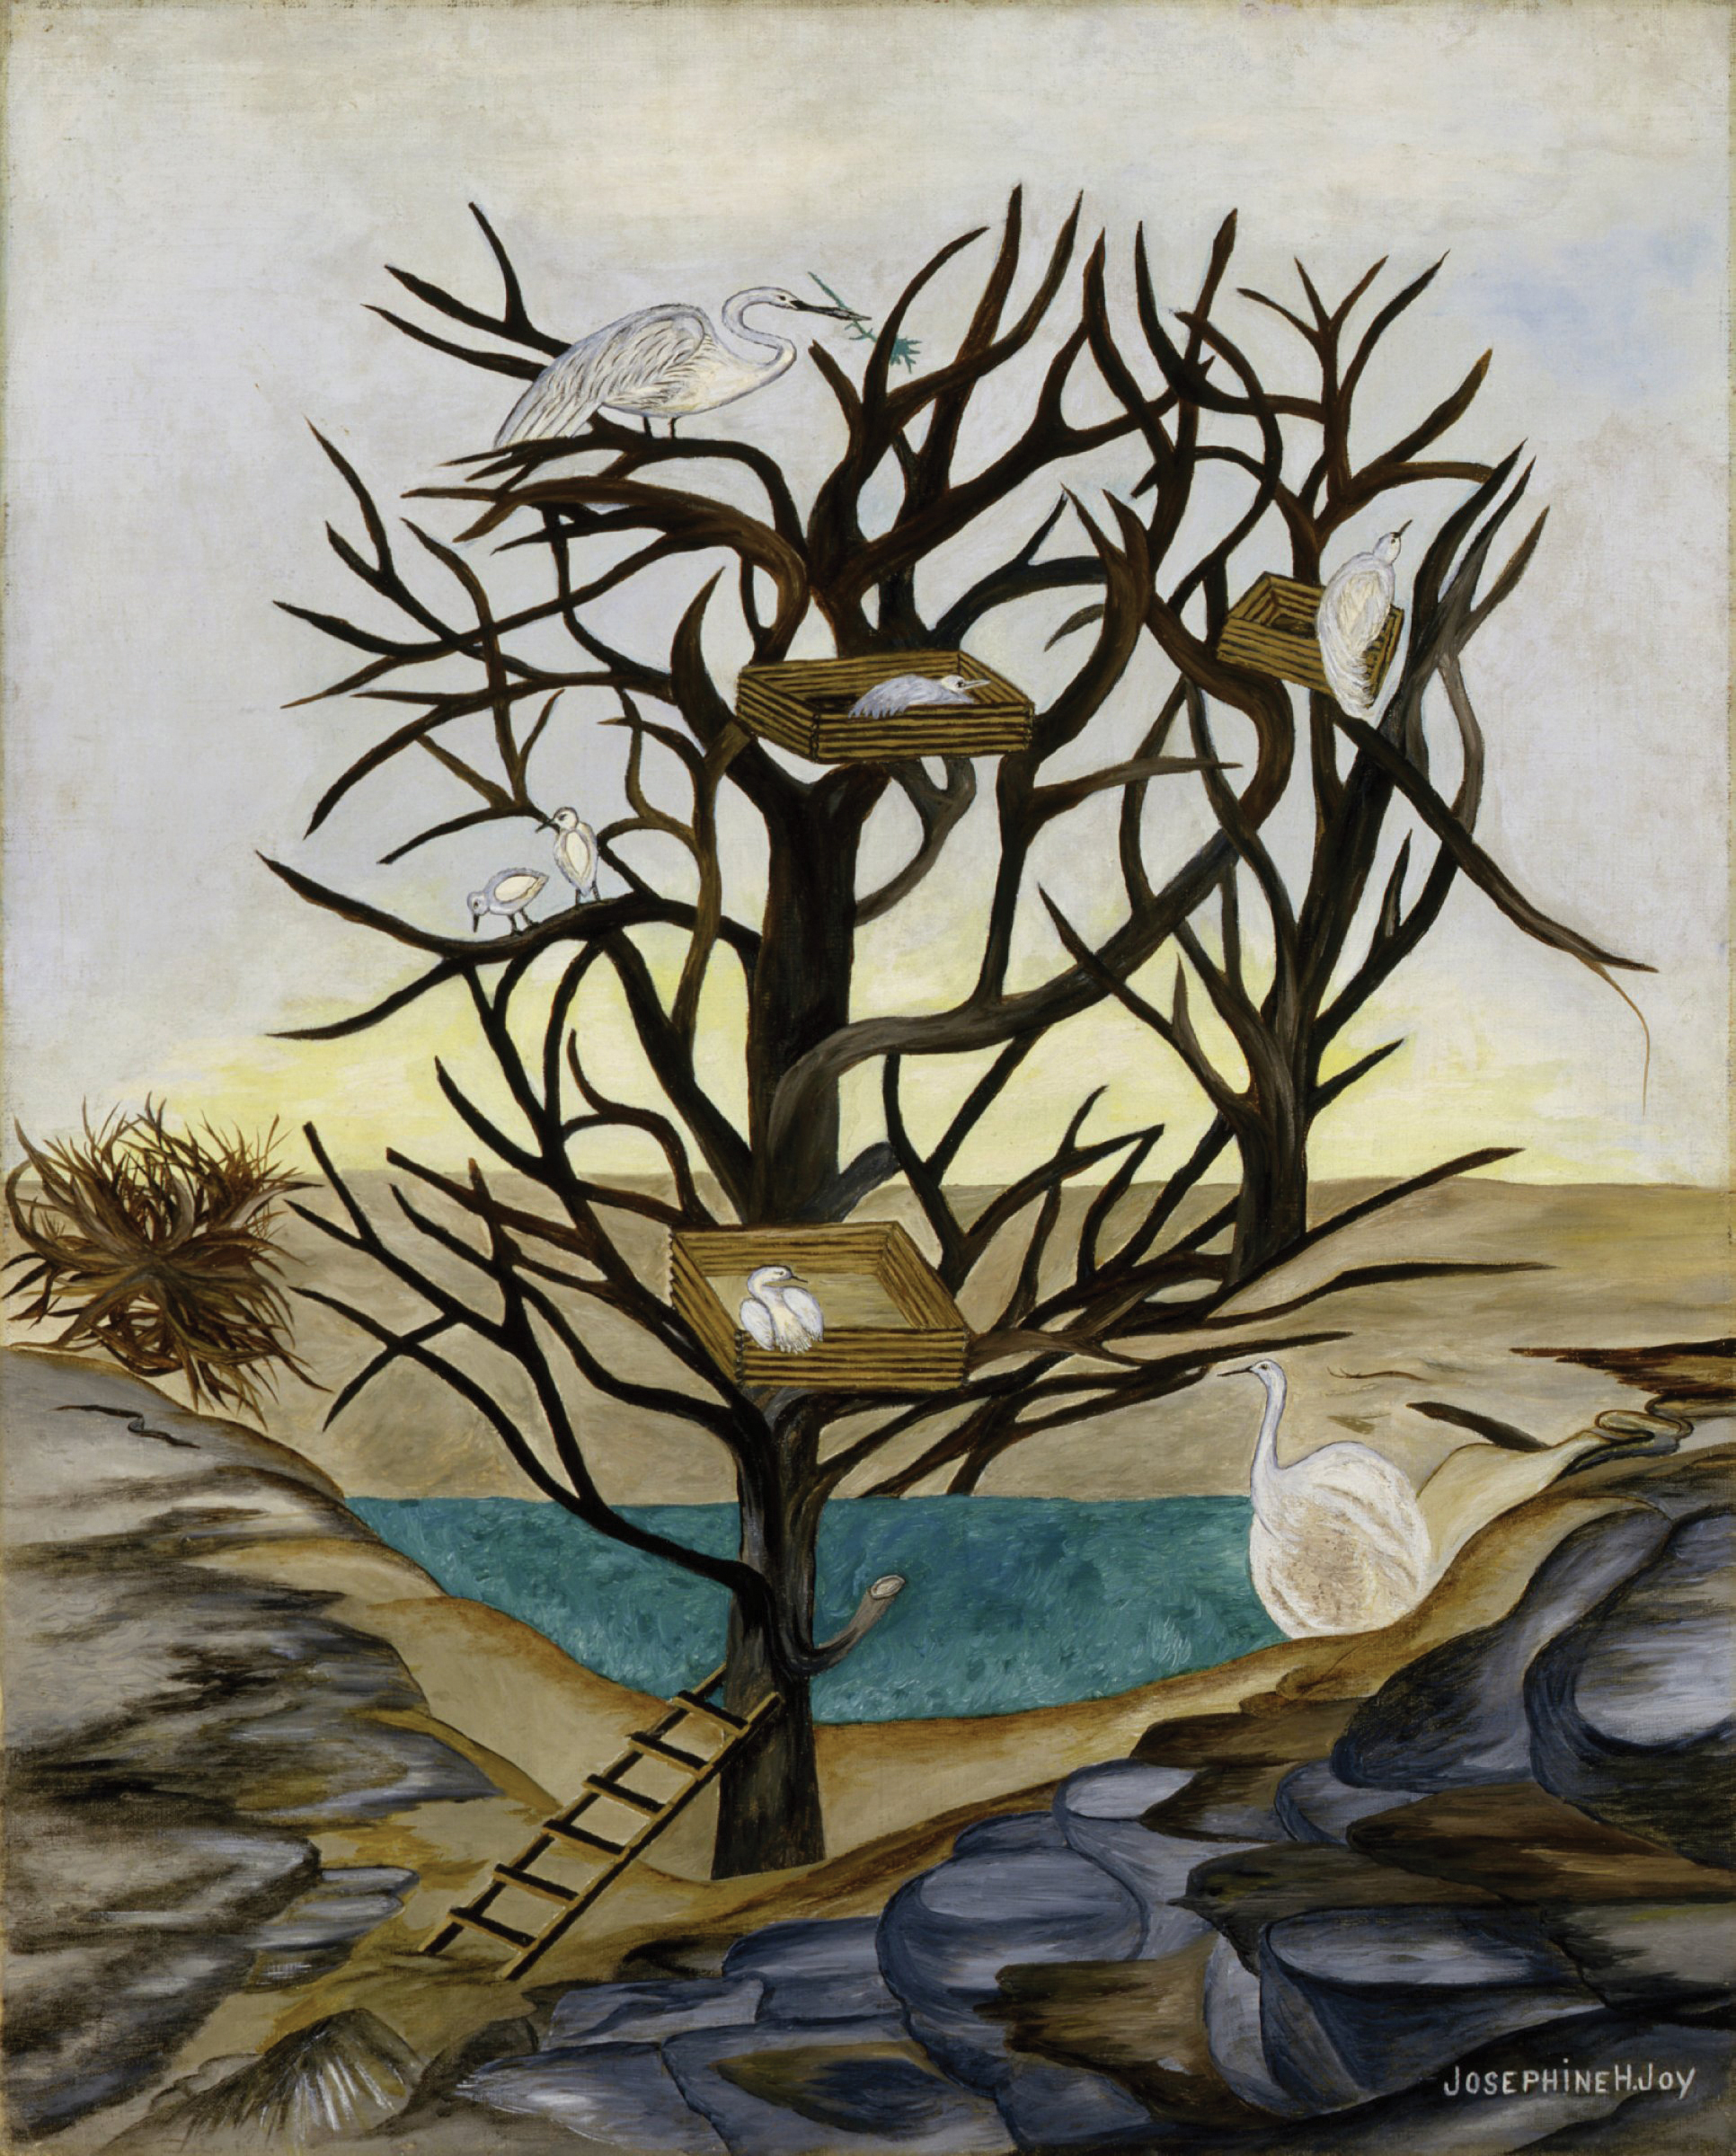 Several birds, large and small sit on branches or in nests in a bare tree with twisting branches; a wooden ladder leans against the tree trunk.